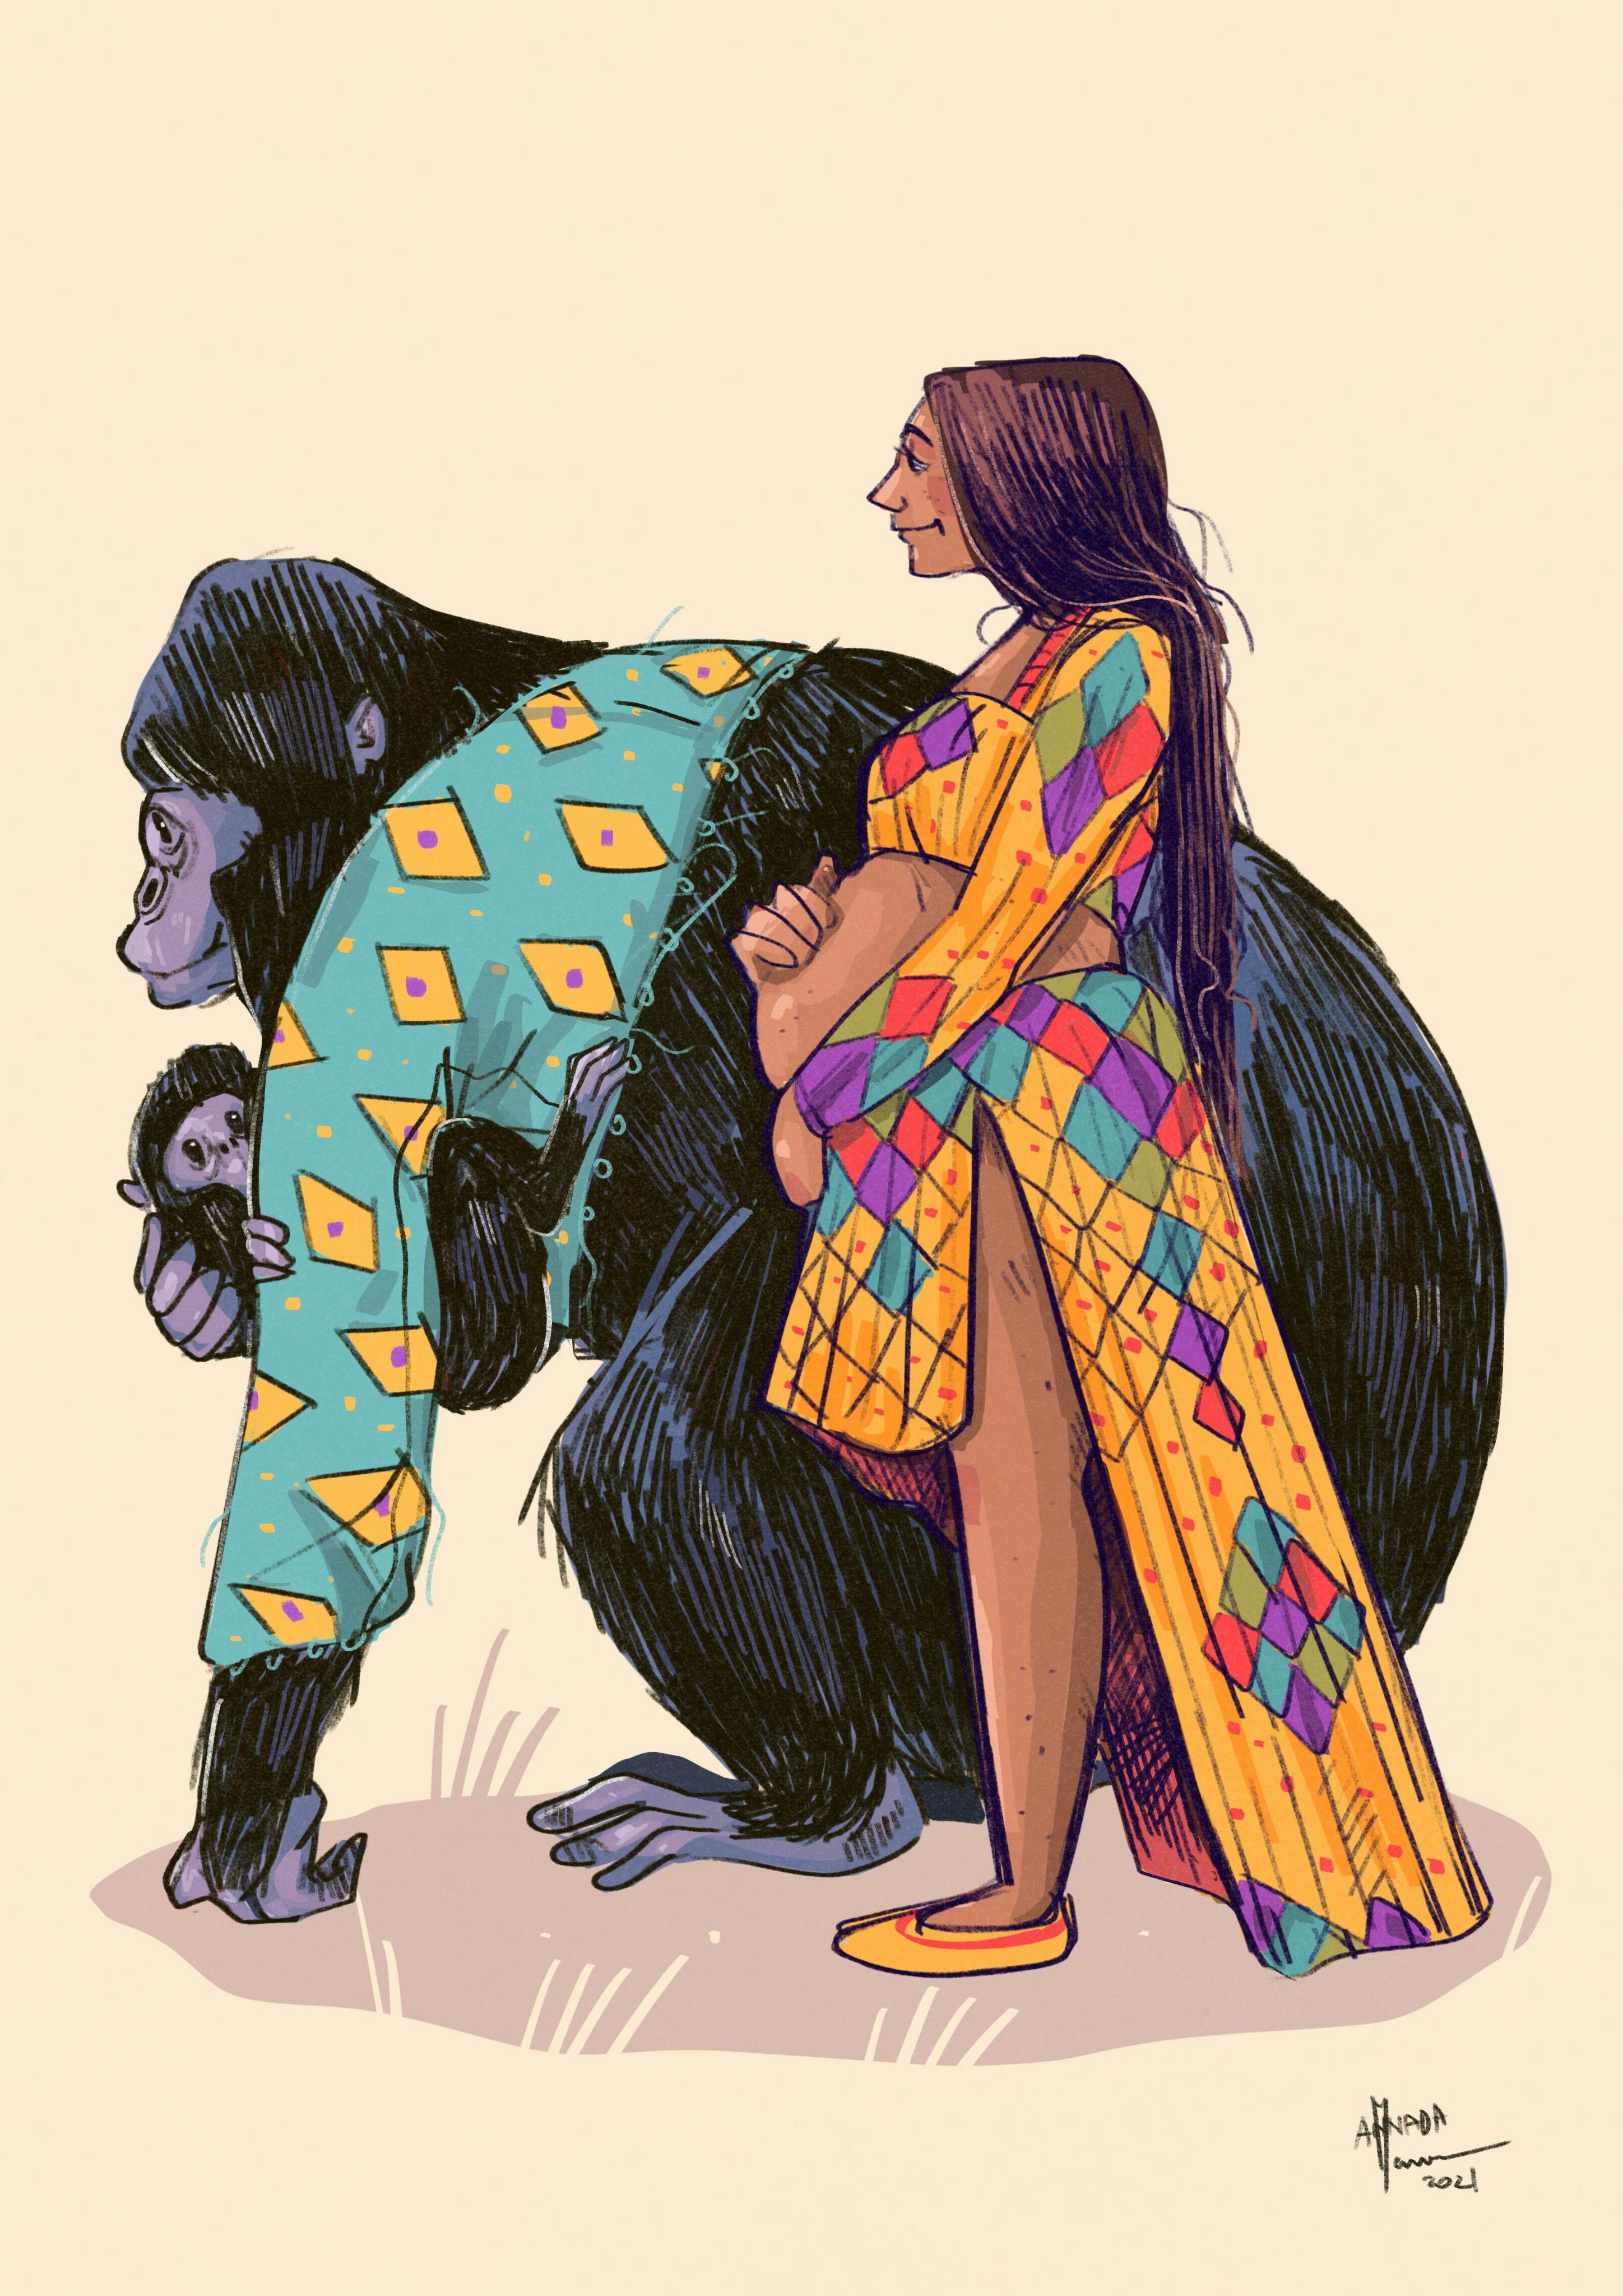 A pregnant woman and a gorilla holding its baby